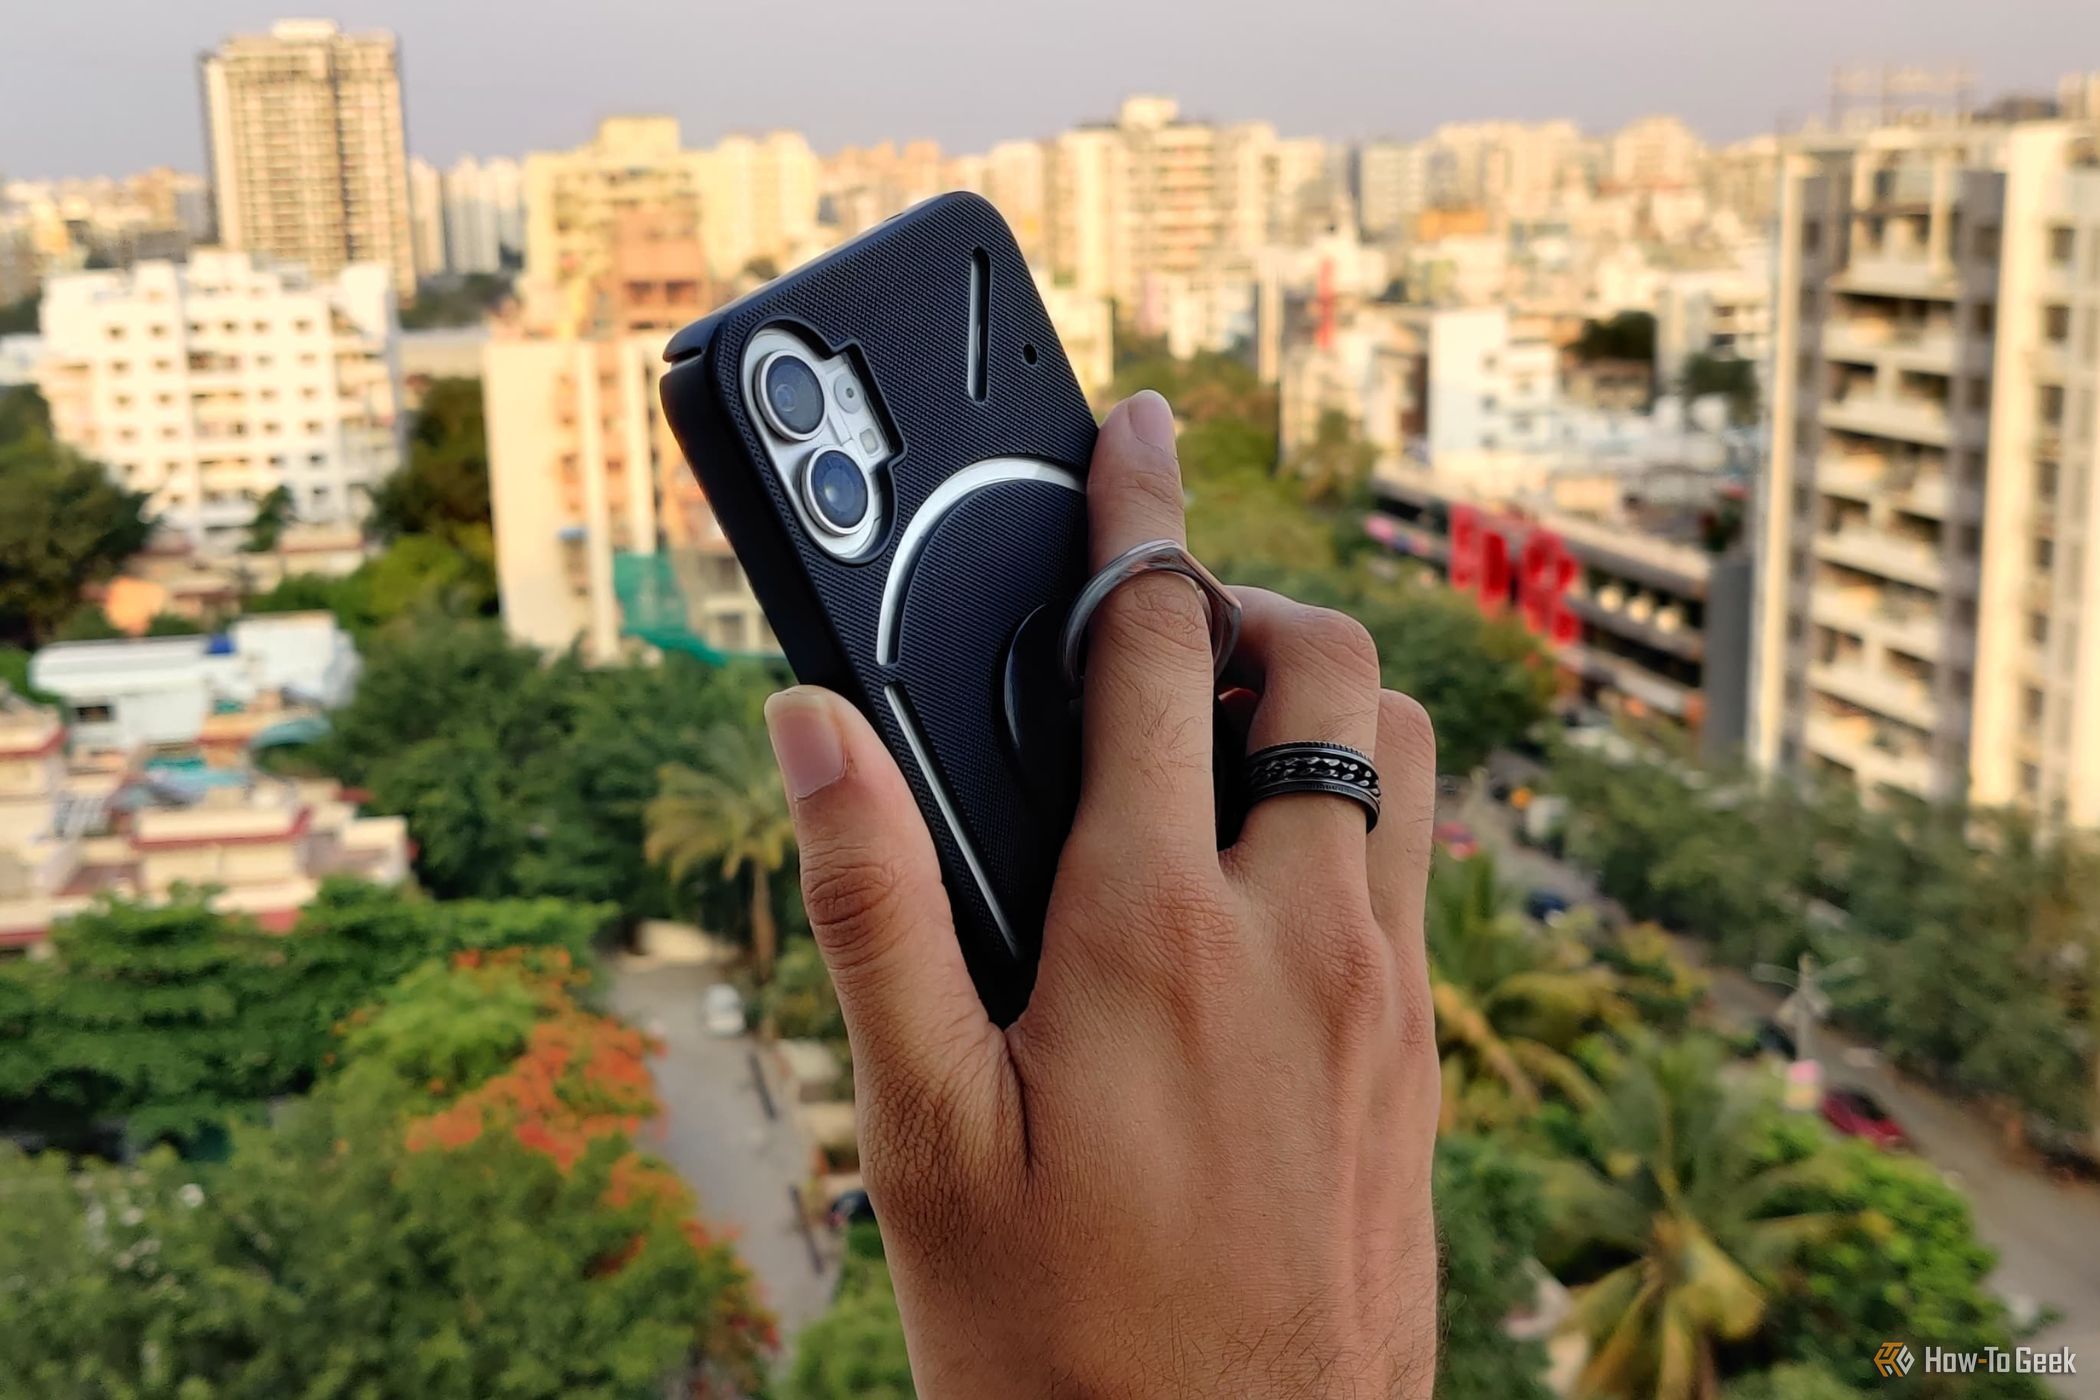 Holding a phone with a ring holder, with a city view in the background.